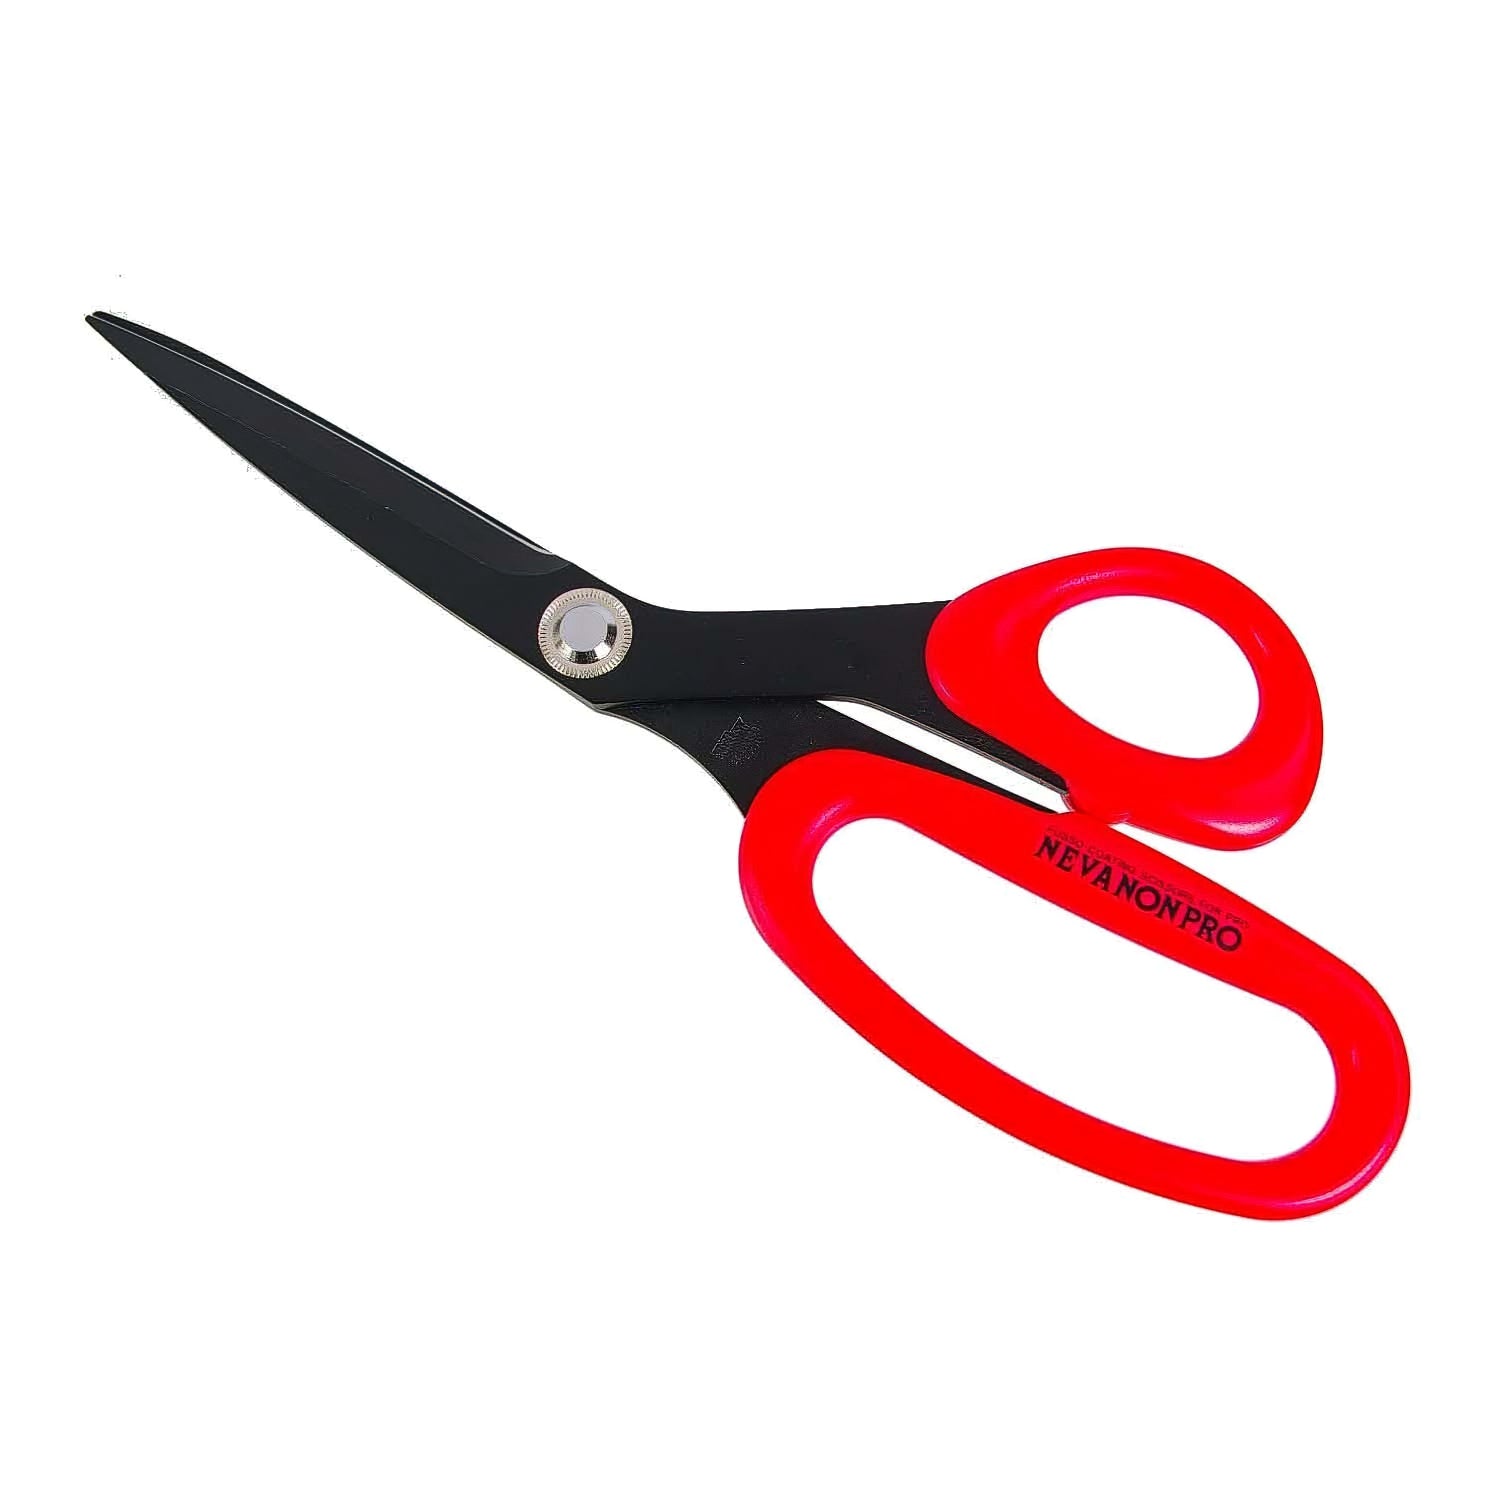 Home Kitchen Red Rubber Coated Grip Metal Cutter Scissors 19cm Long